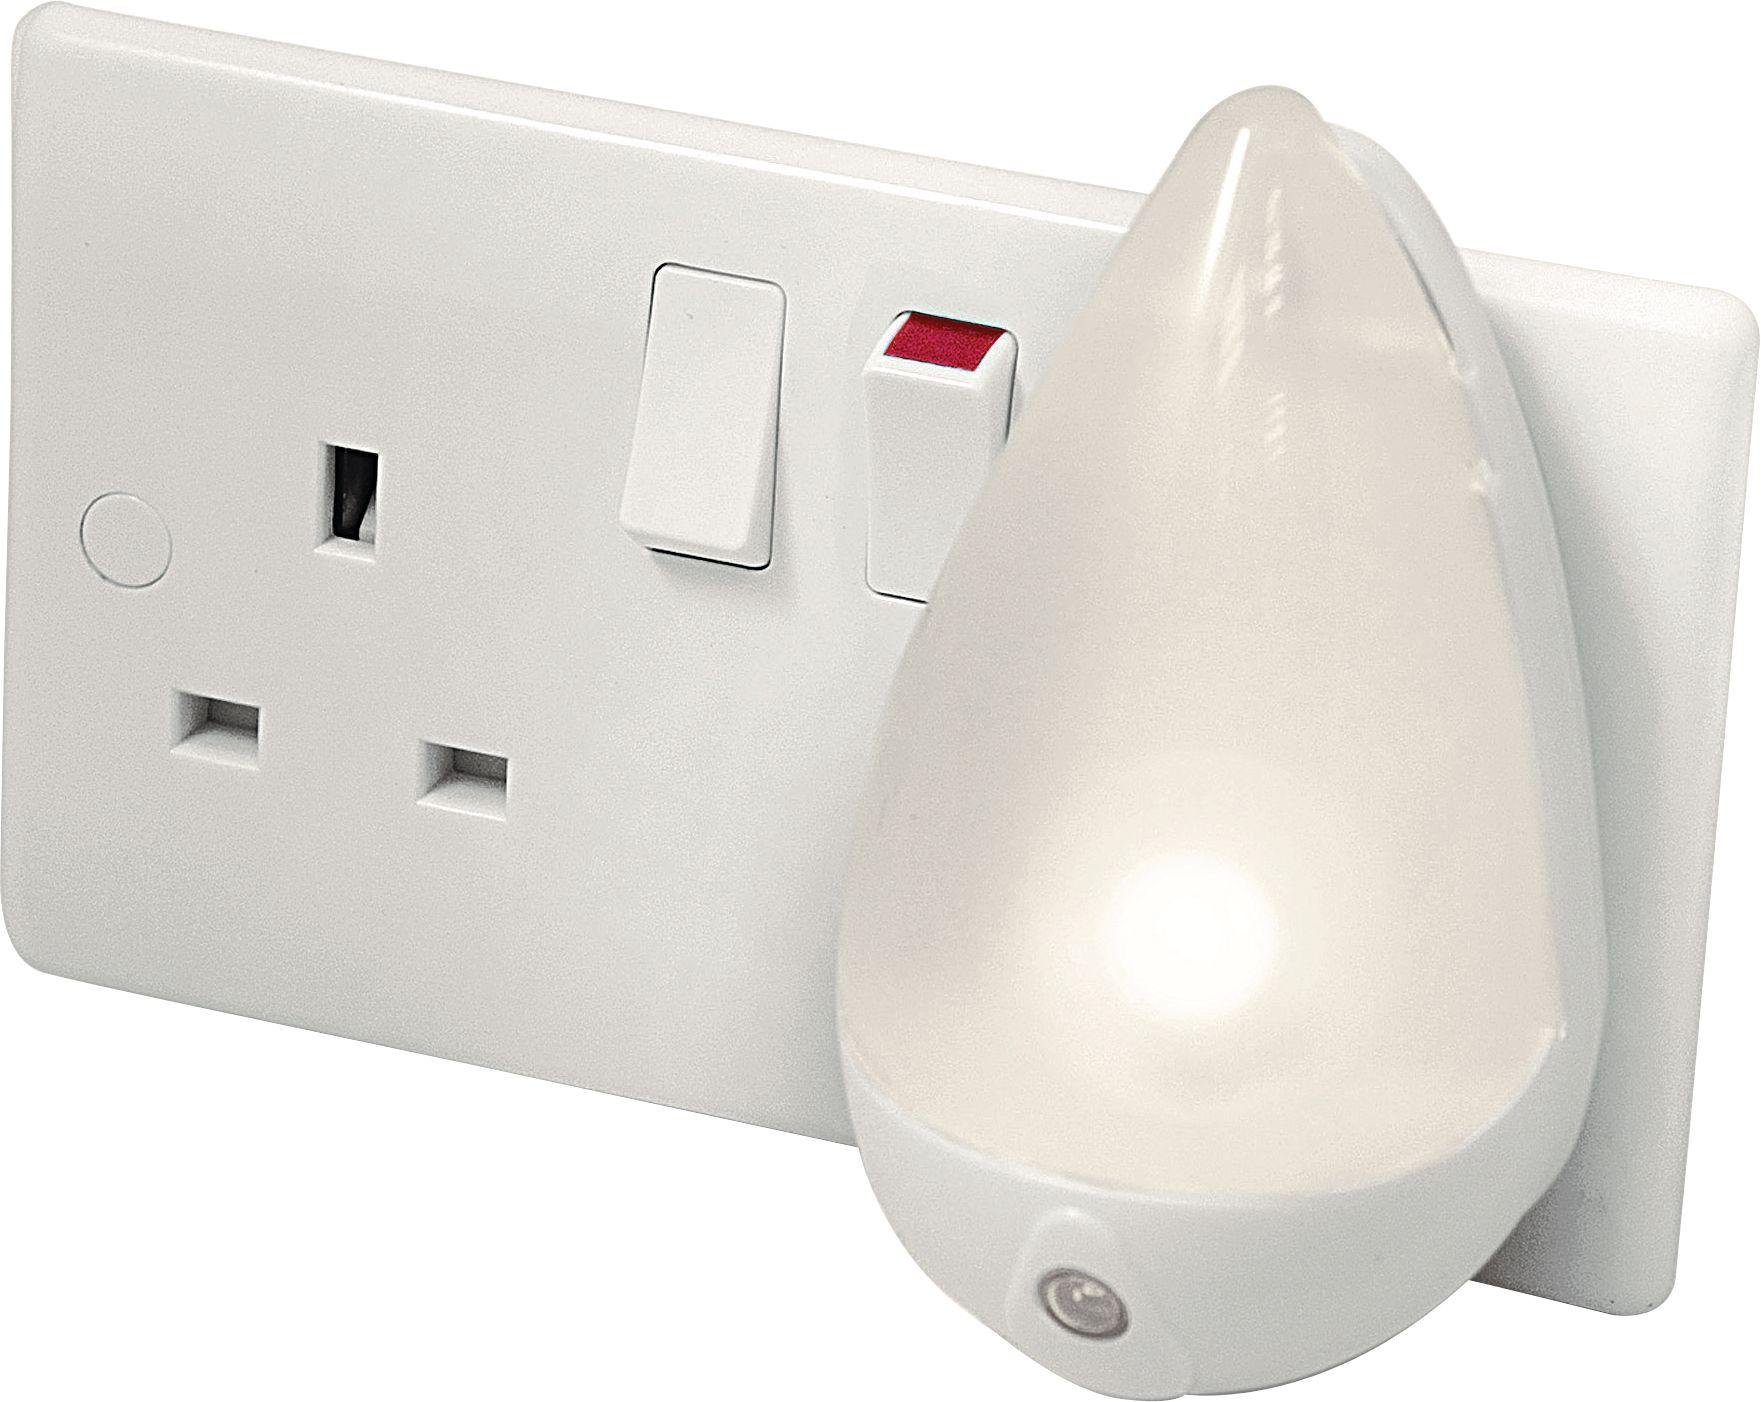 Masterplug LED Night Light Twin Pack Review